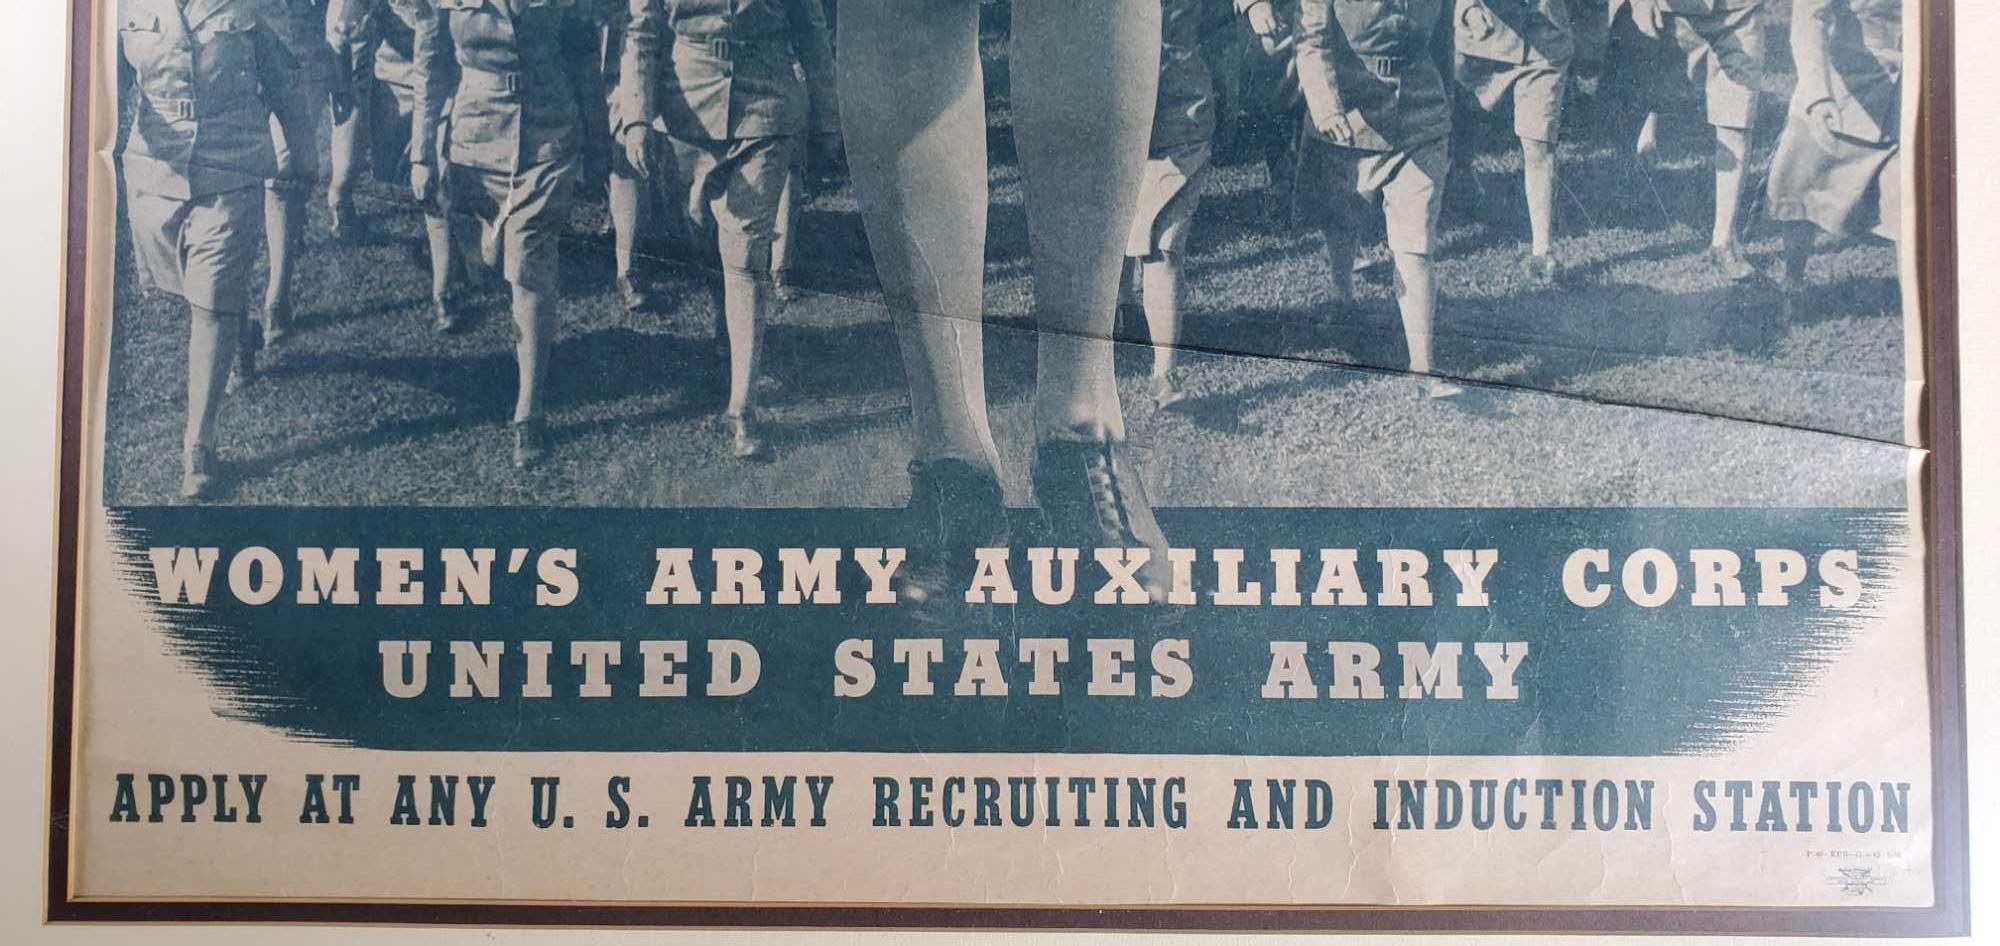 Framed And Matted WWII WAAC Recruitment Poster P48-RPB-11-6-42-50M